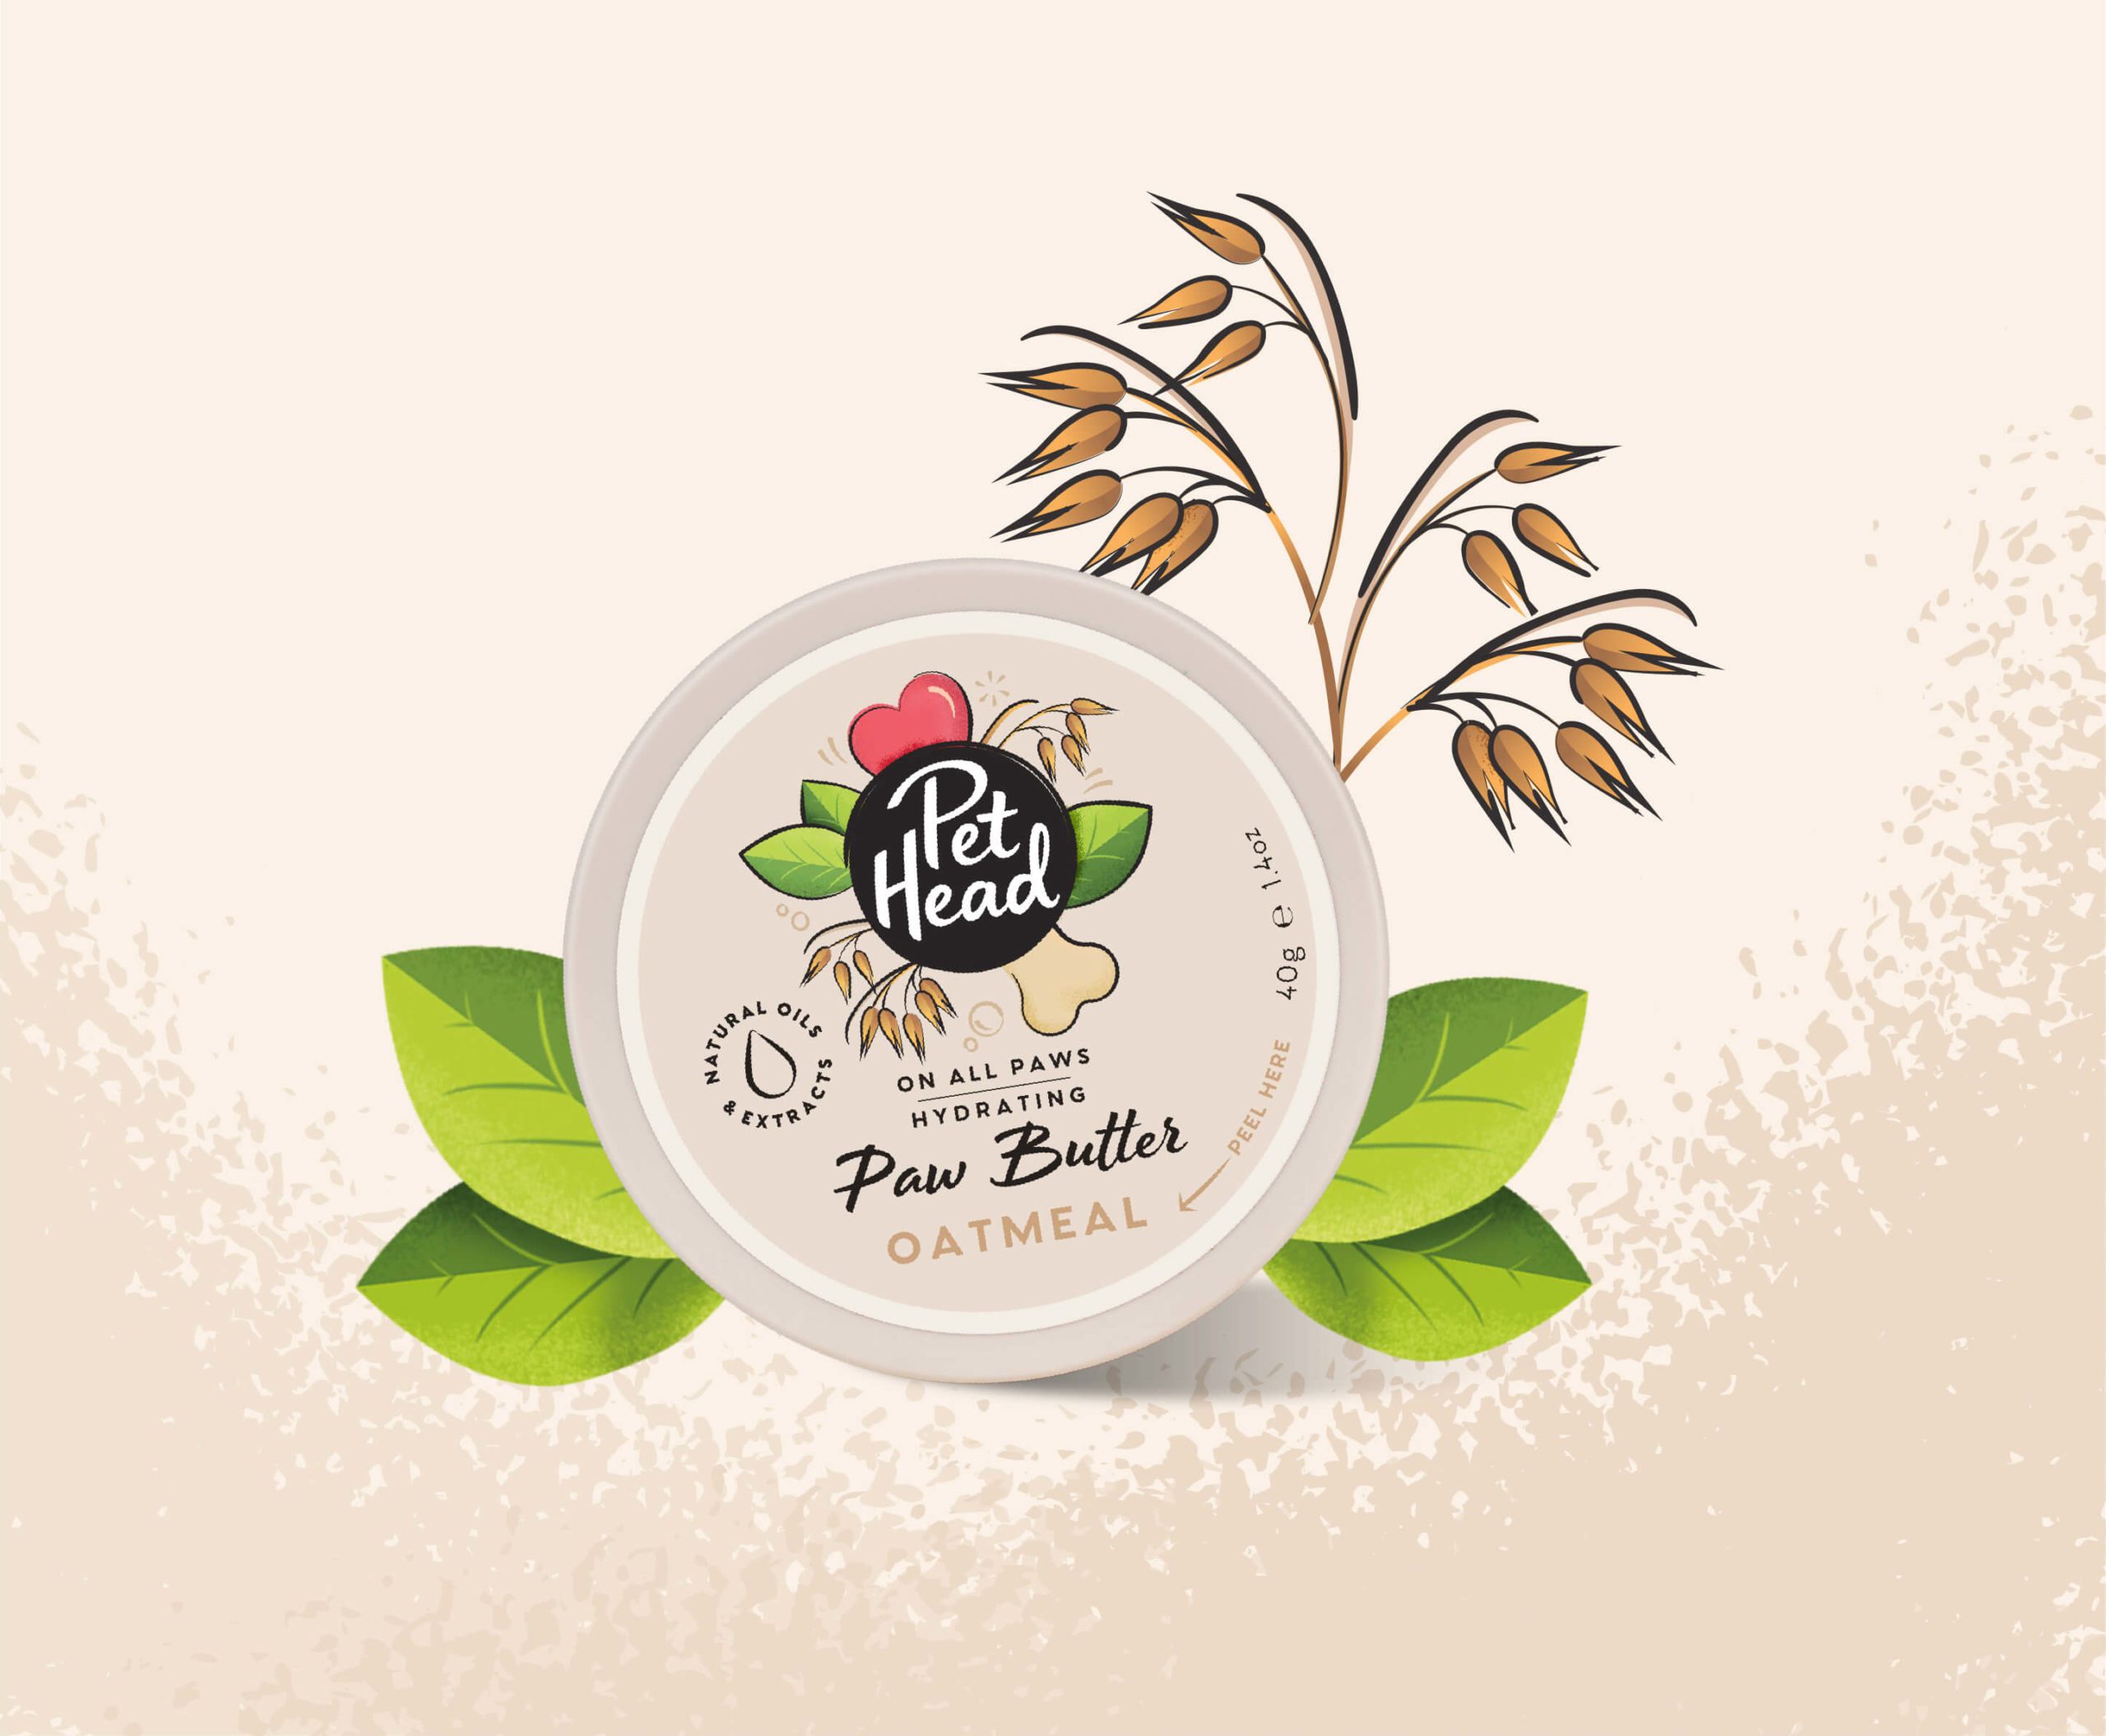 Paw Butter tub lid image